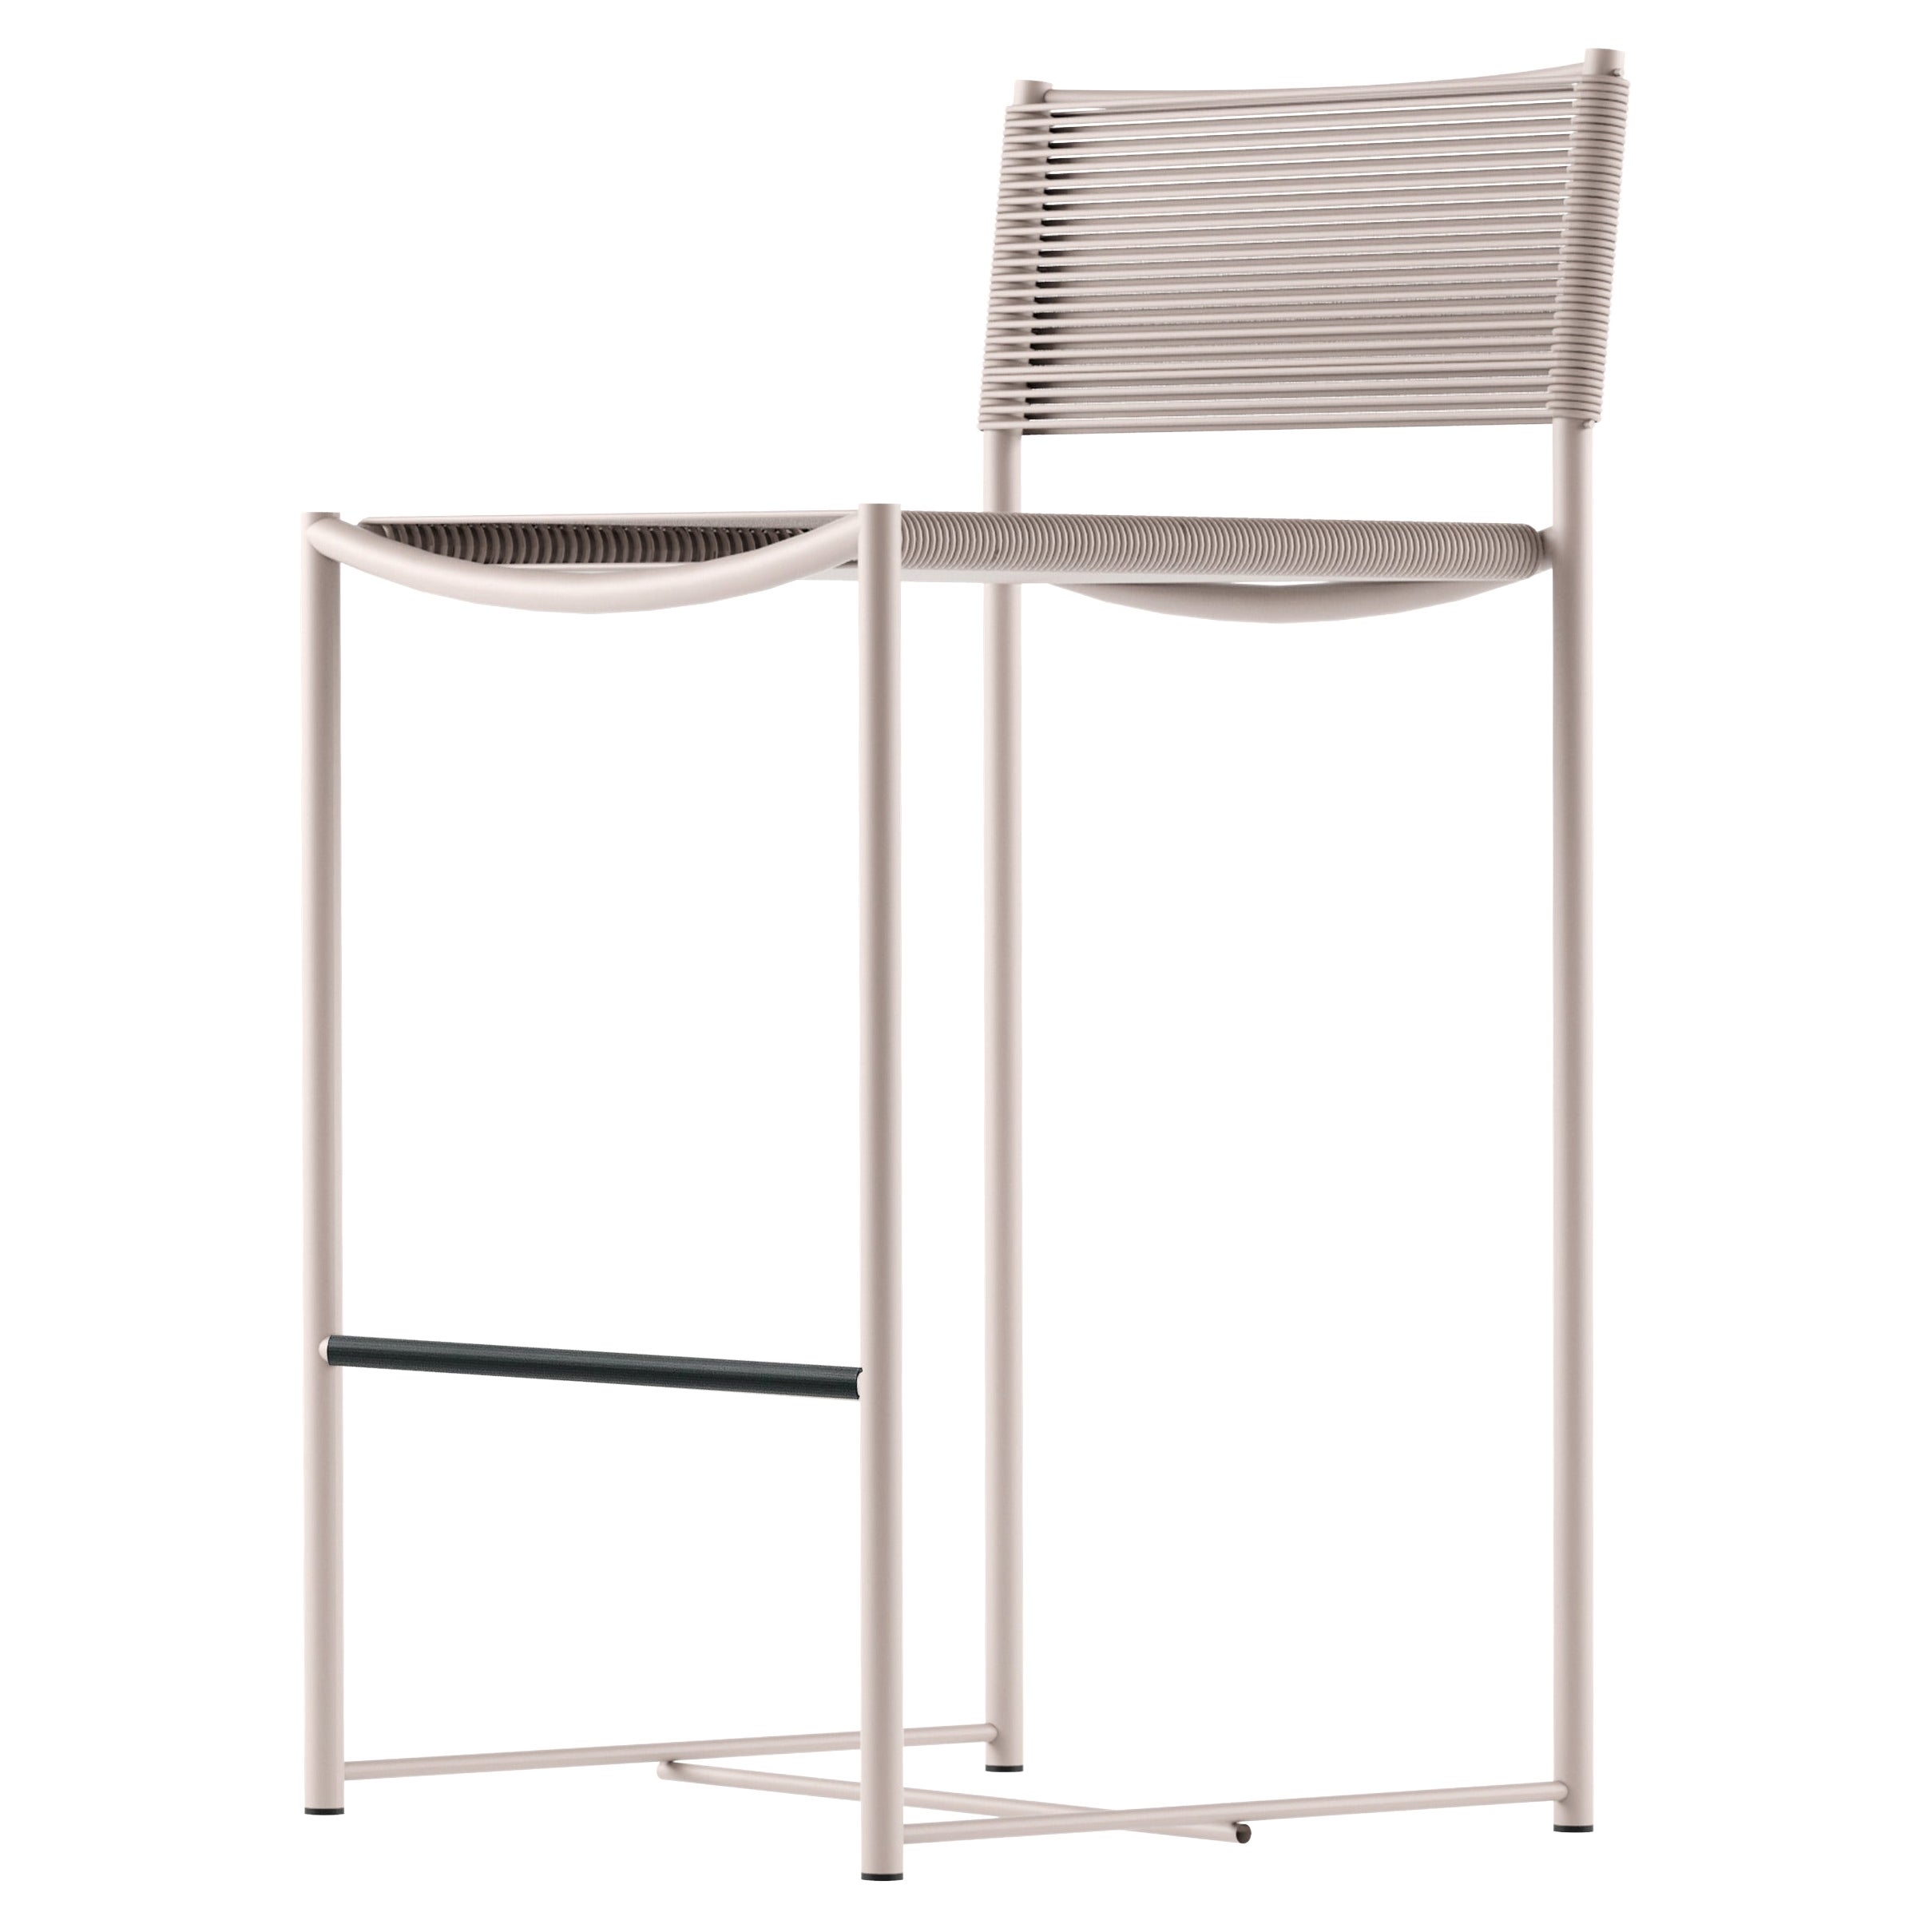 Alias 164 Spaghetti Stool with Beige PVC Seat and Sand Lacquered Steel Frame